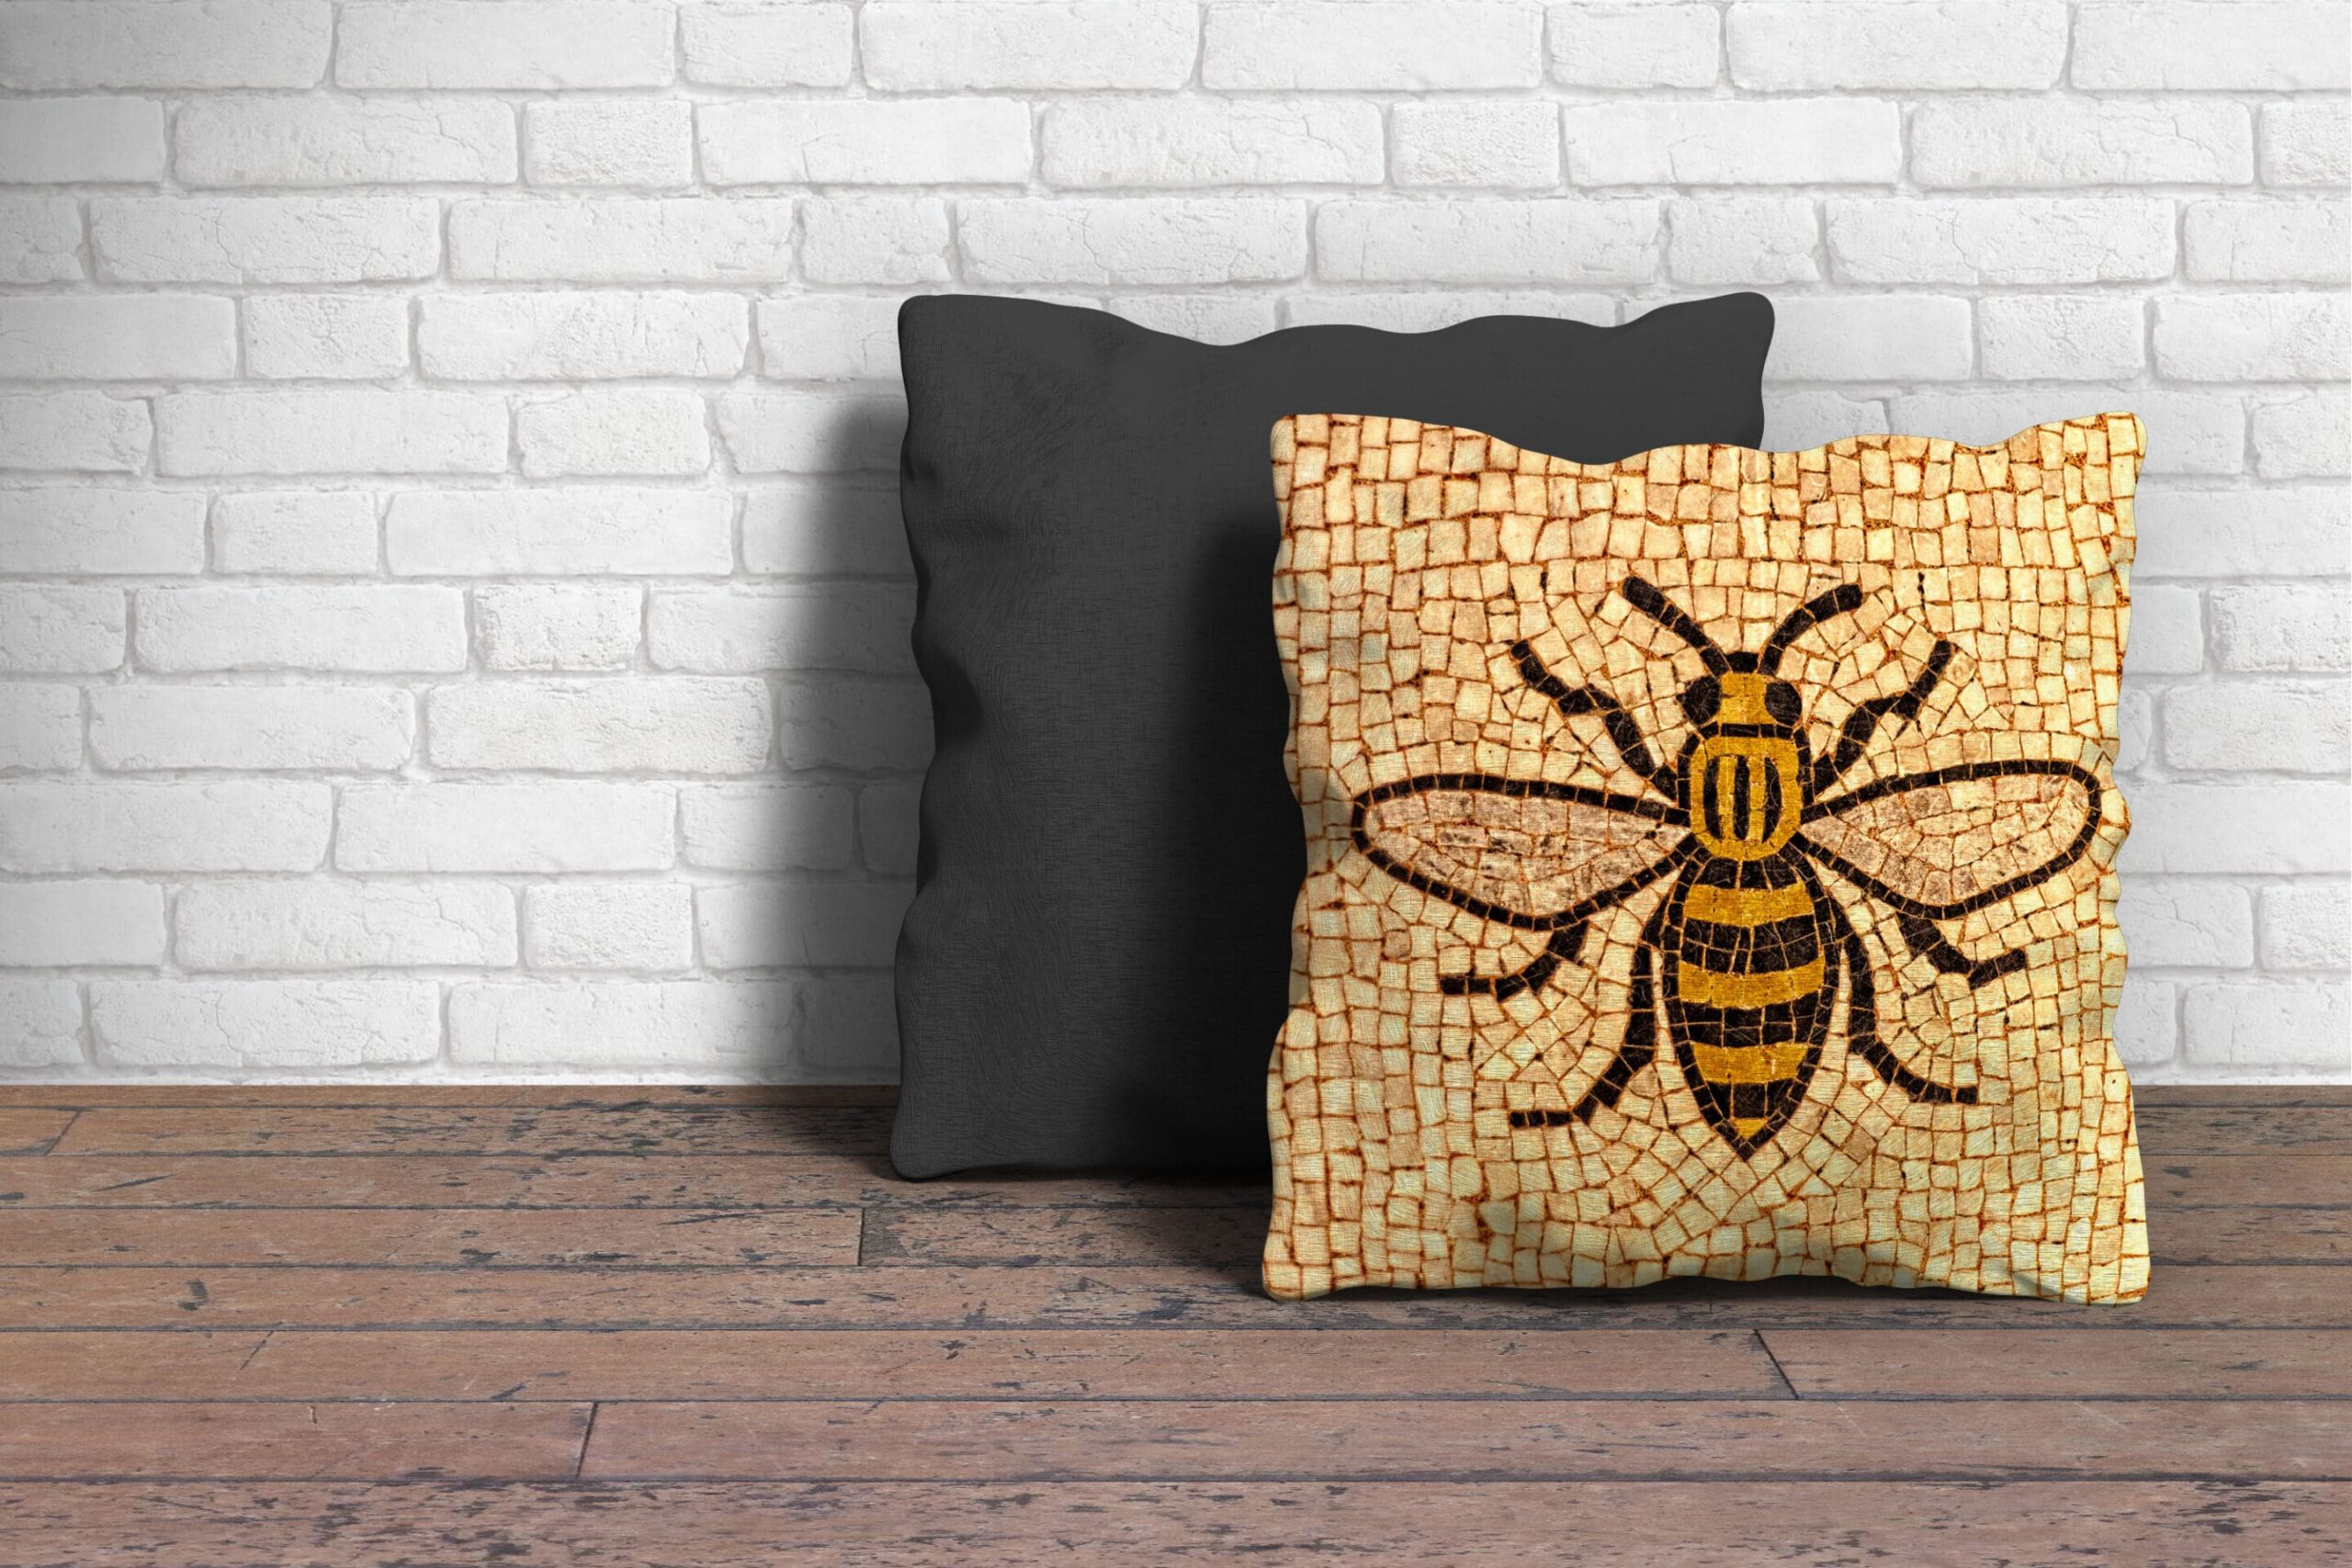 Manchester Bee Cushion Poster Art and Gift Ideas 100% cotton 2